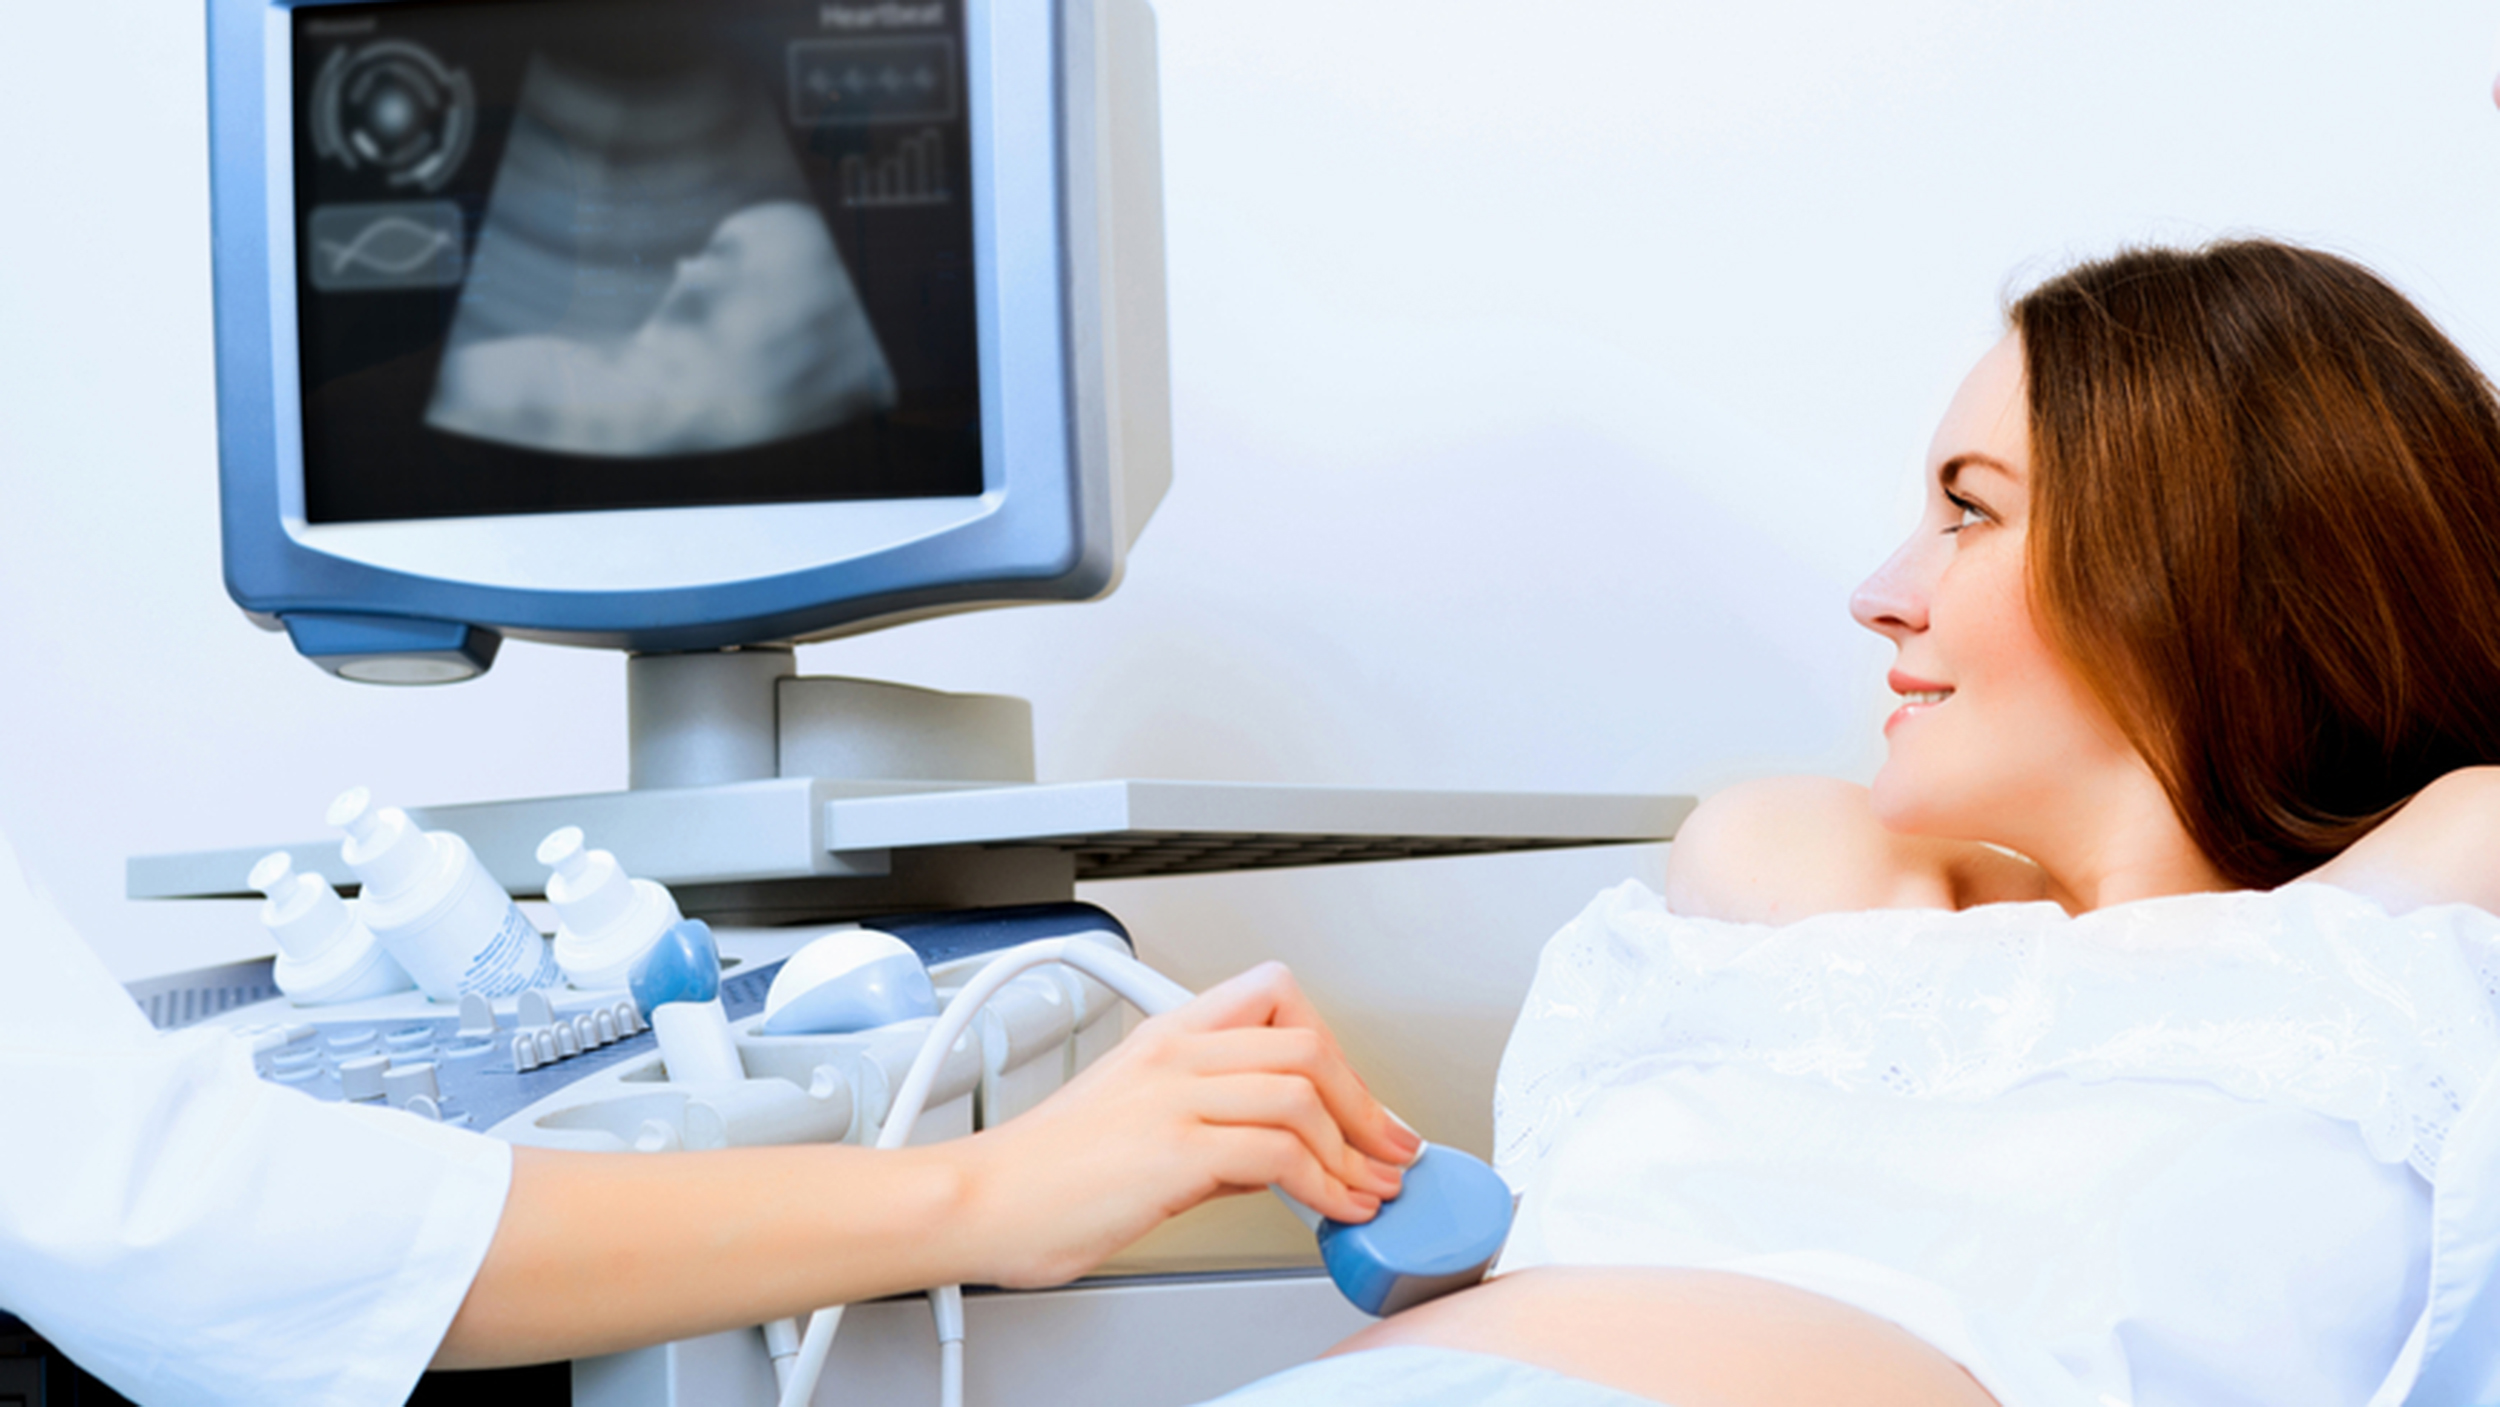 What Are the Benefits of Ultrasound?